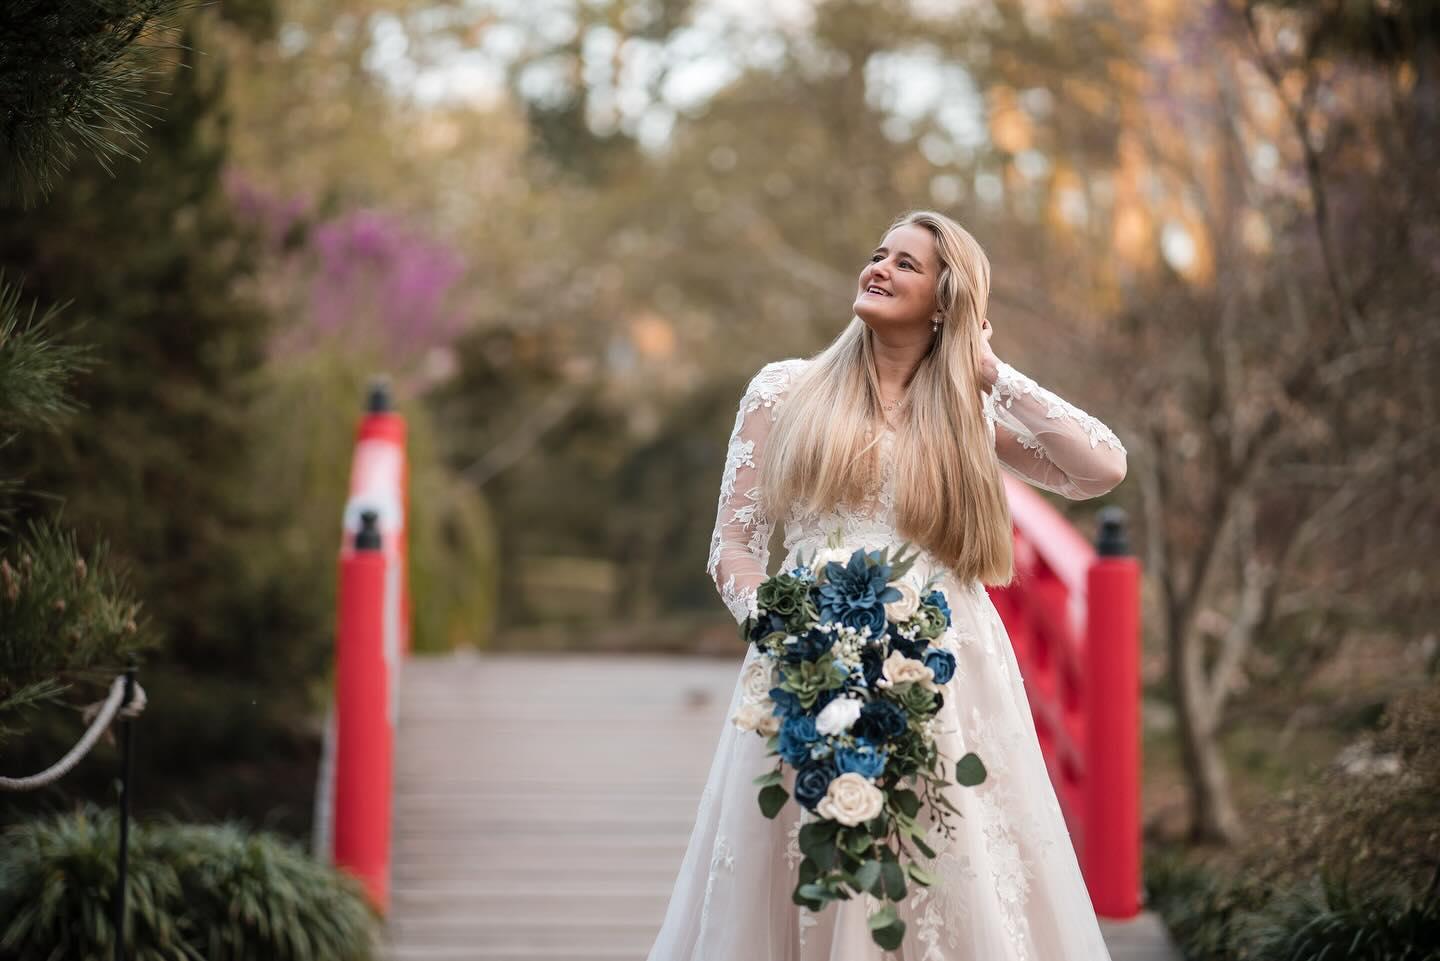 A Day to Remember: Bridal Portraits at Duke Gardens